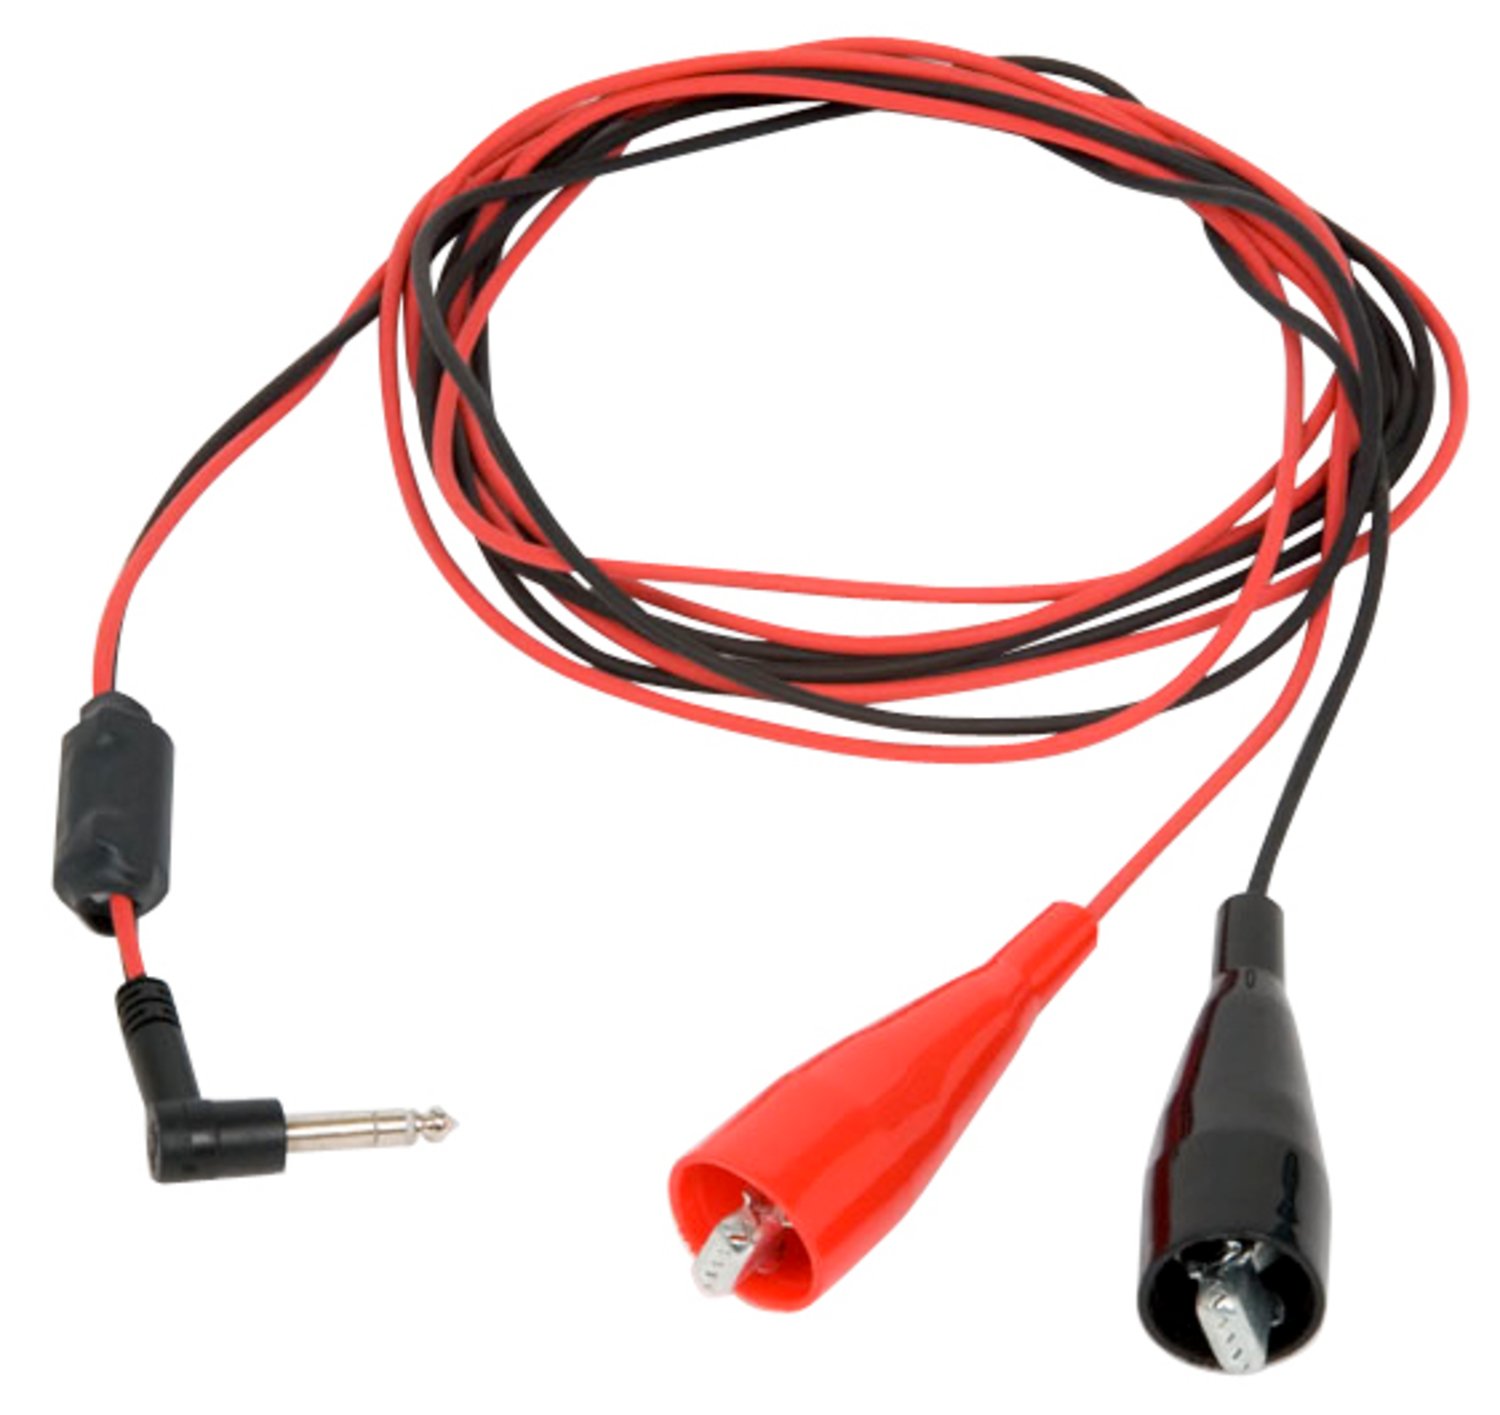 7000058140 - 3M Large Clip Direct-Connect Transmitter Cable for Most Cable/Fault
Locators 2876, 1/Case